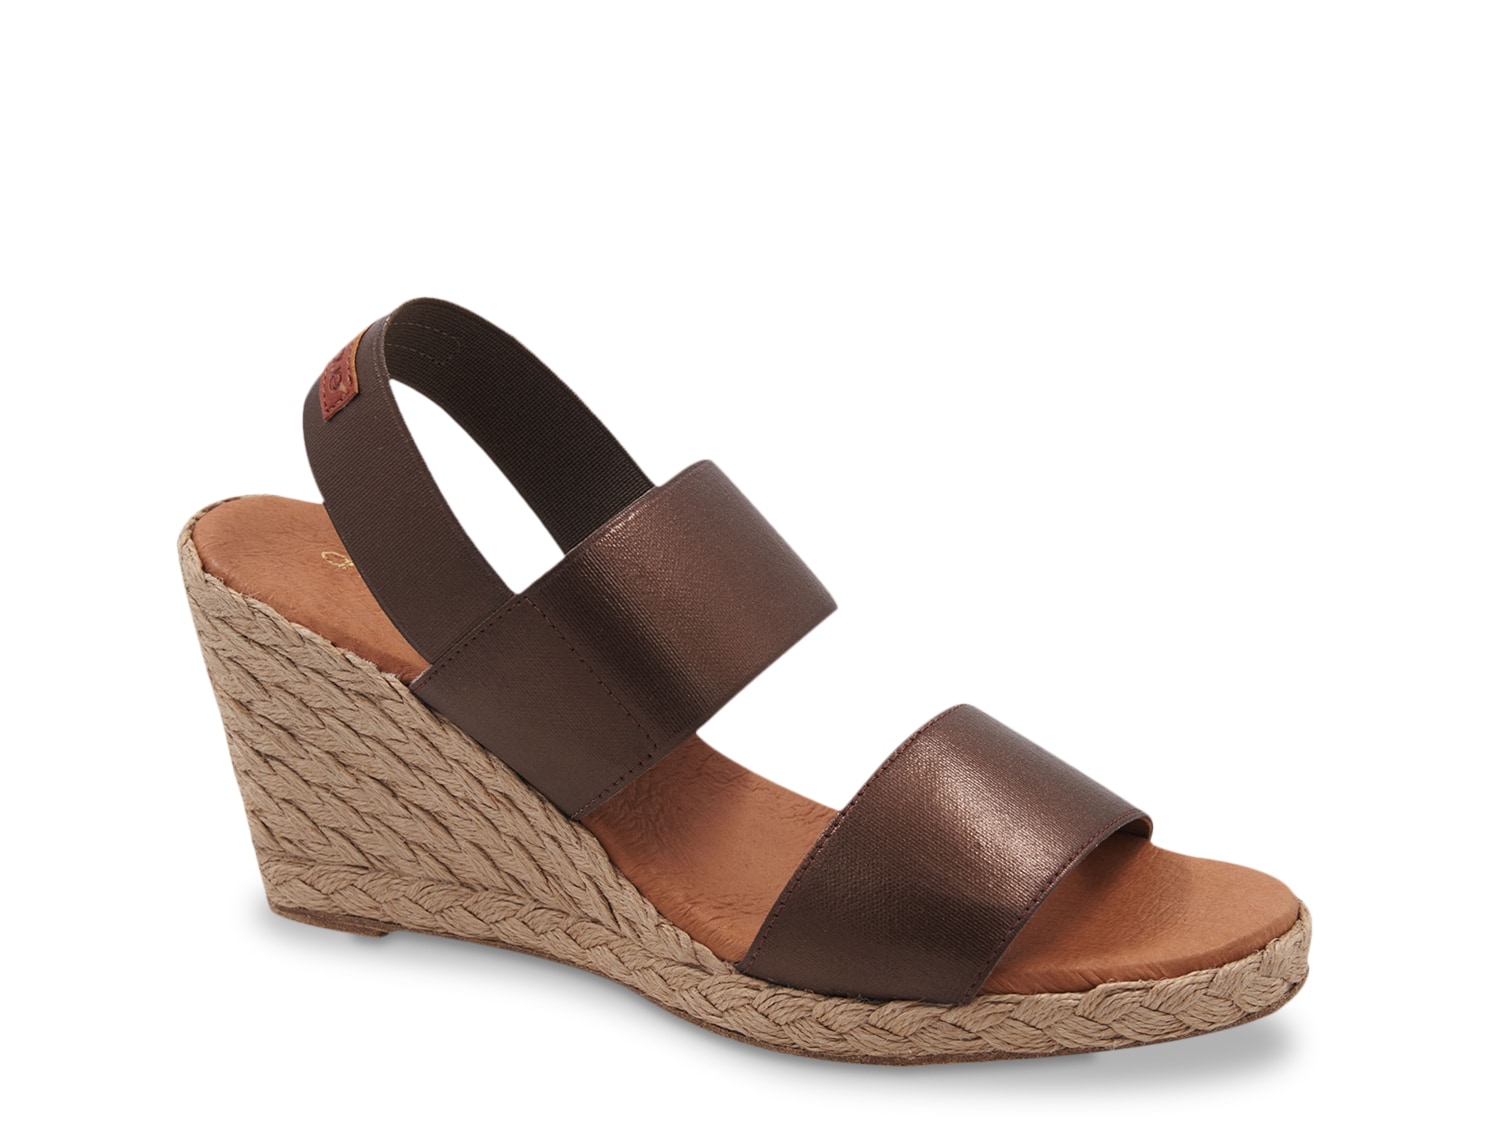 Andre Assous Allison Espadrille Wedge Sandal - Free Shipping | DSW